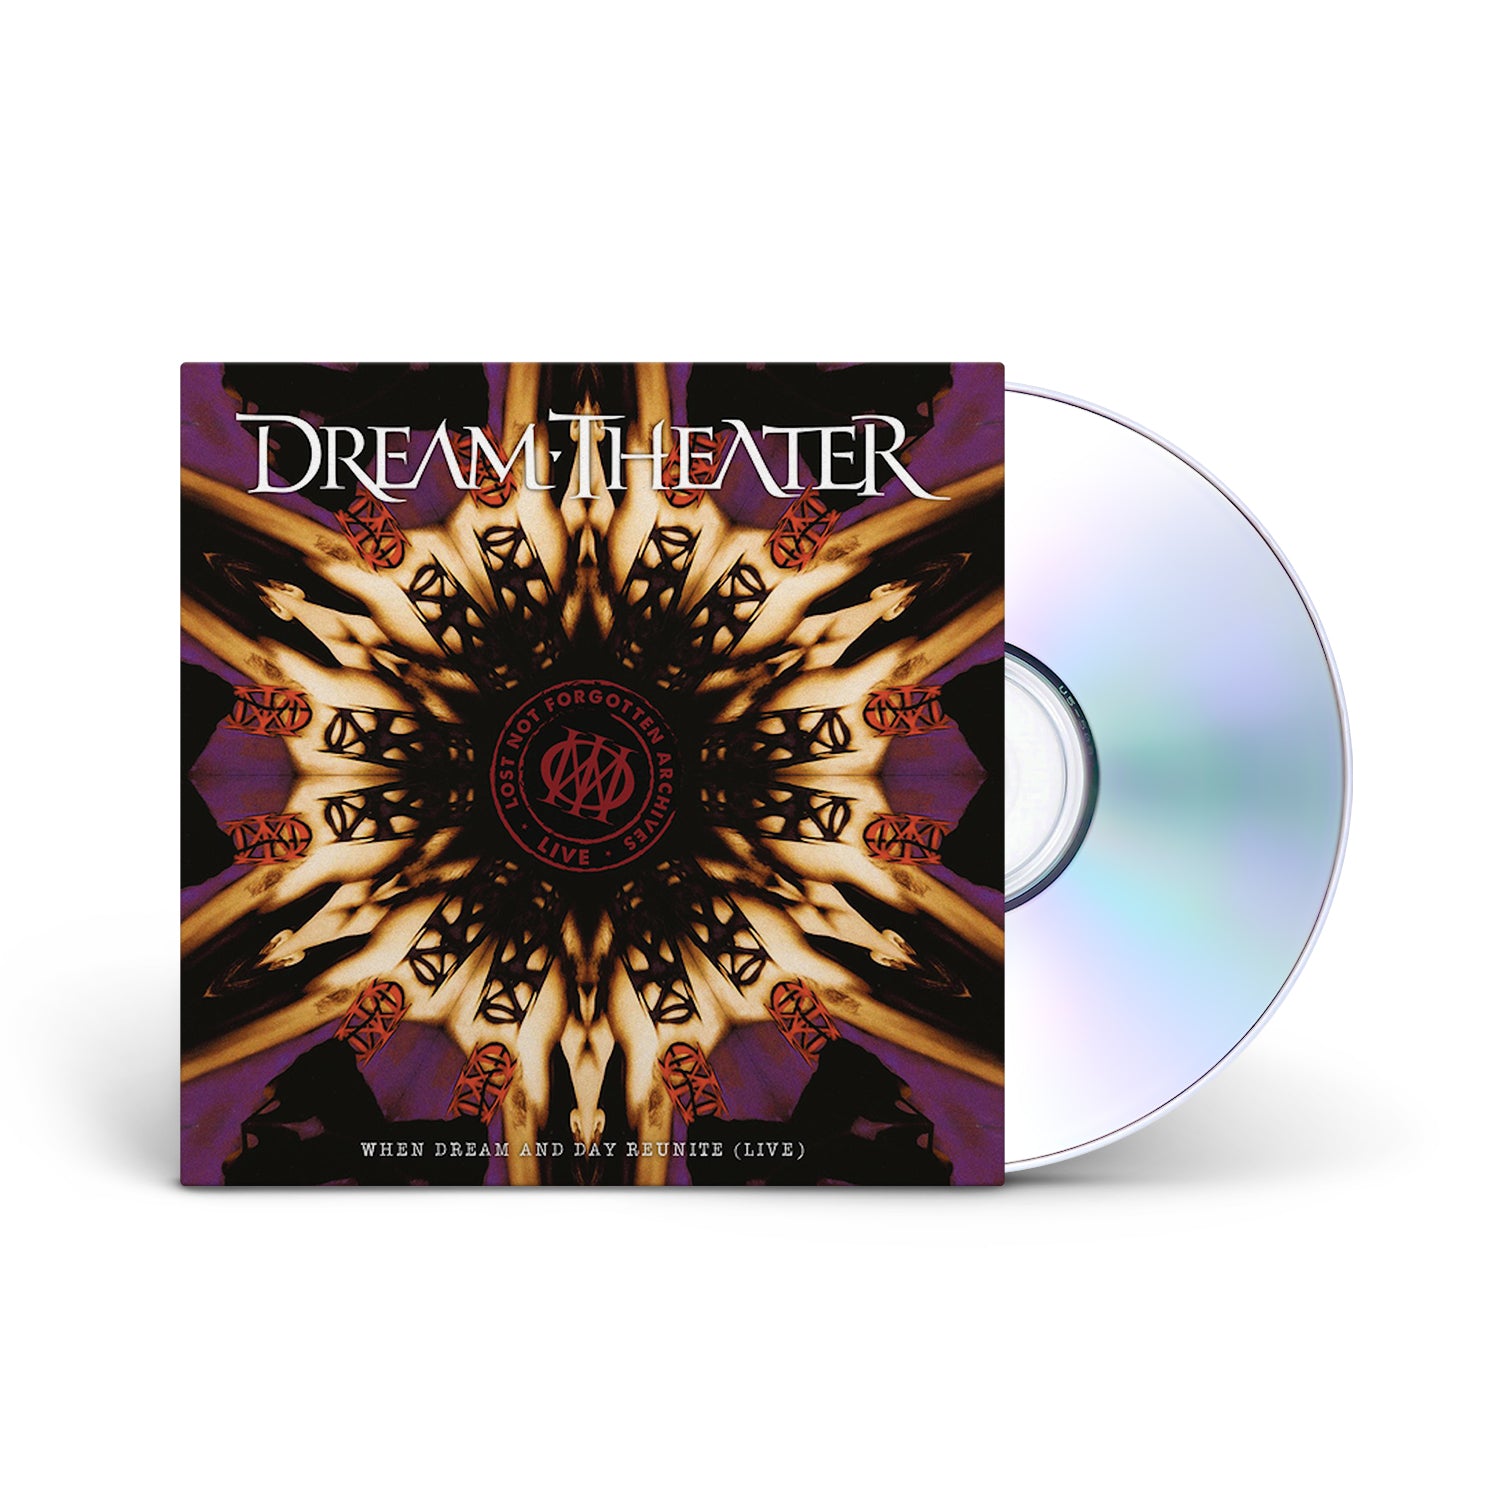 DREAM THEATER - Lost Not Forgotten Archives: When Dream And Day Reunite (Live) - CD